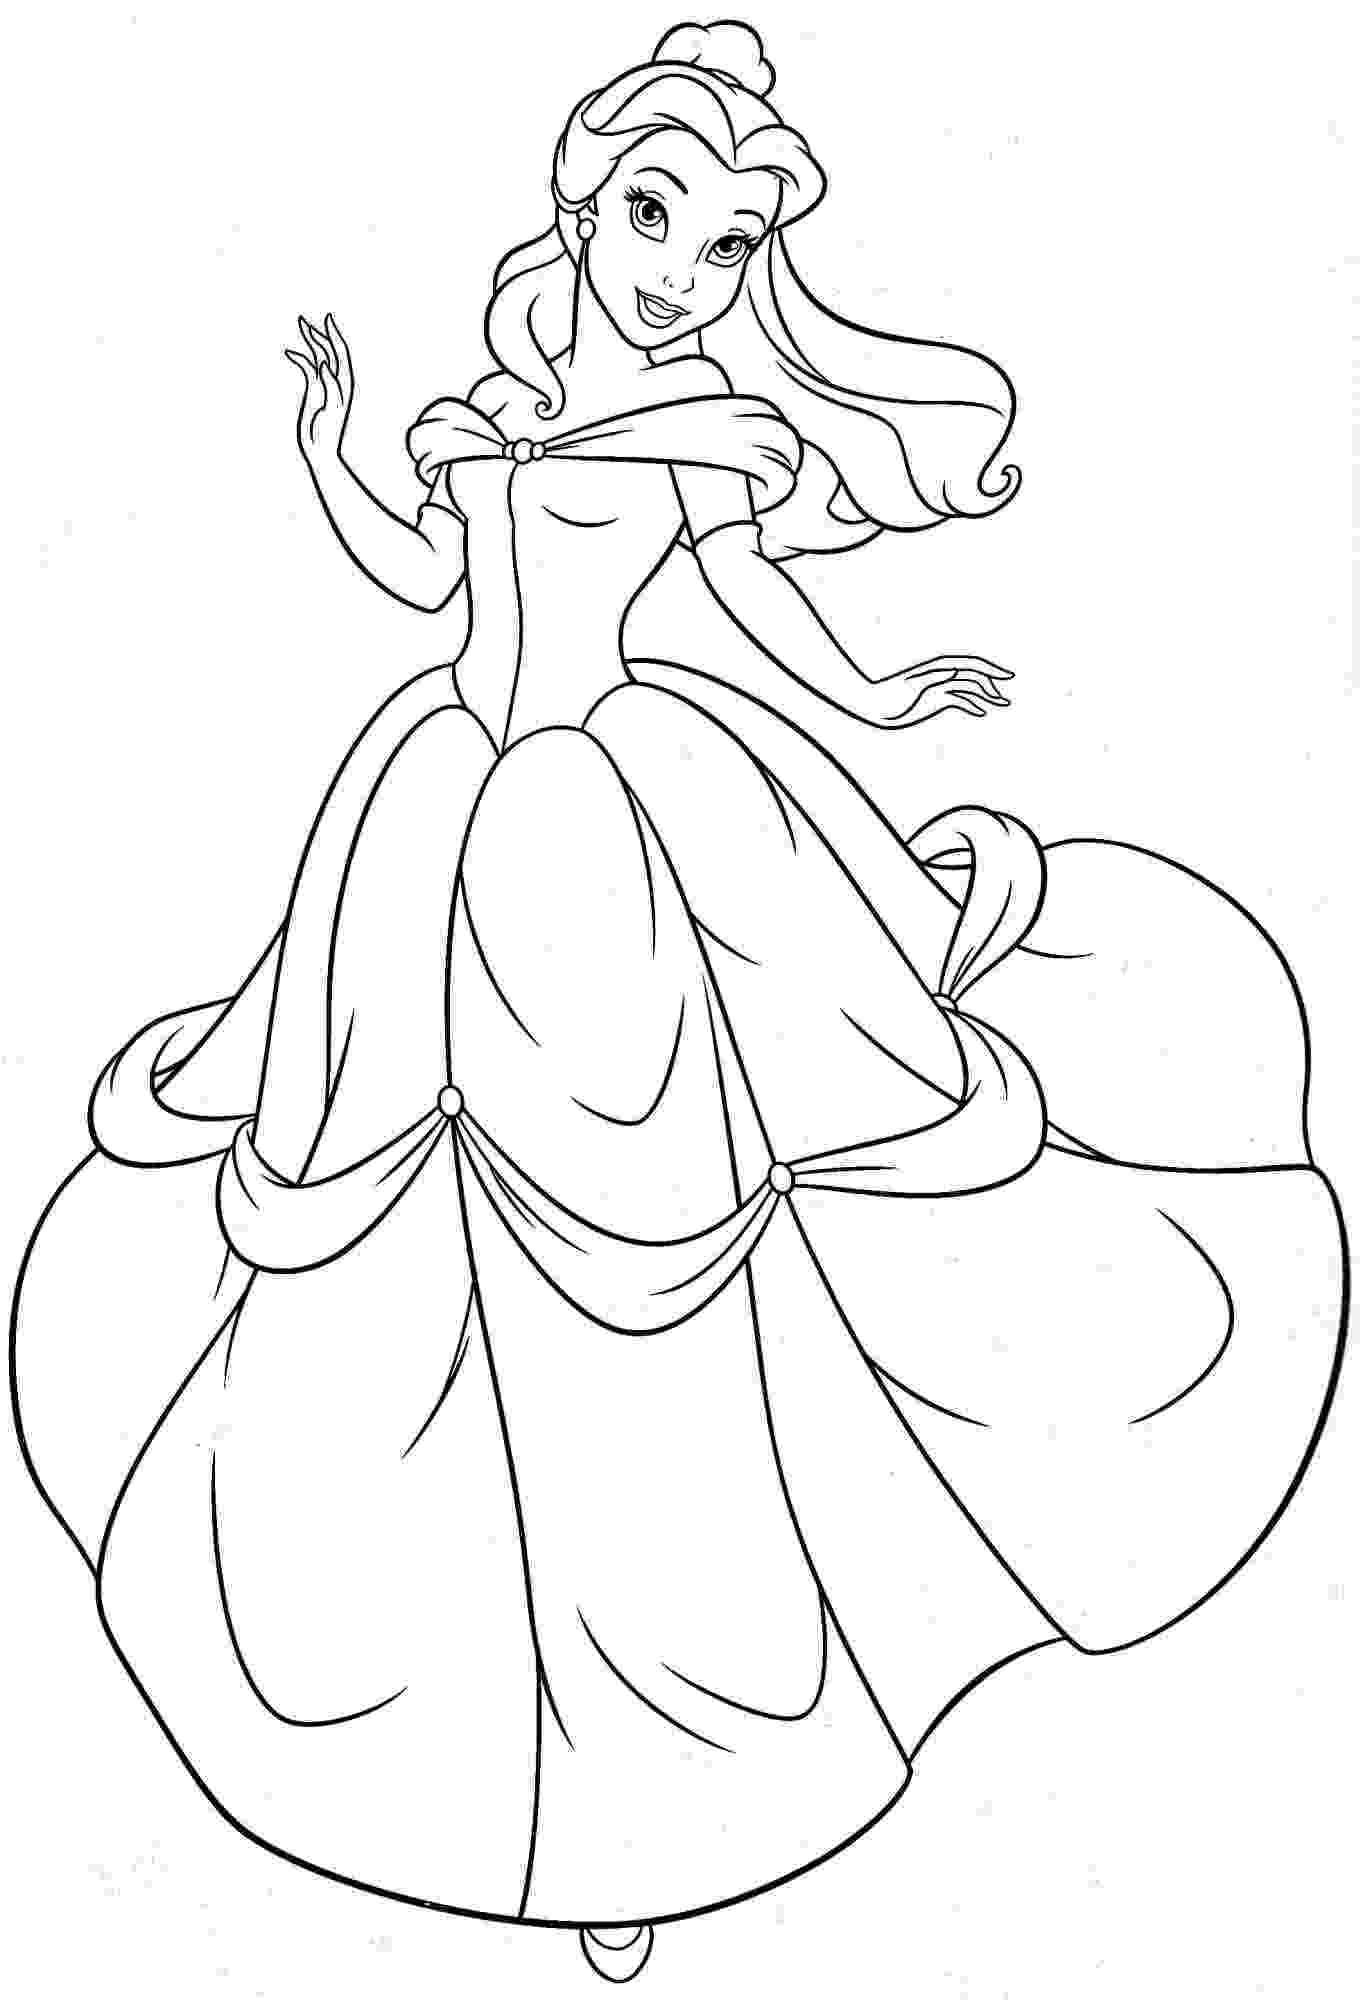 coloring pages online princess princess belle coloring pages to download and print for free online pages coloring princess 